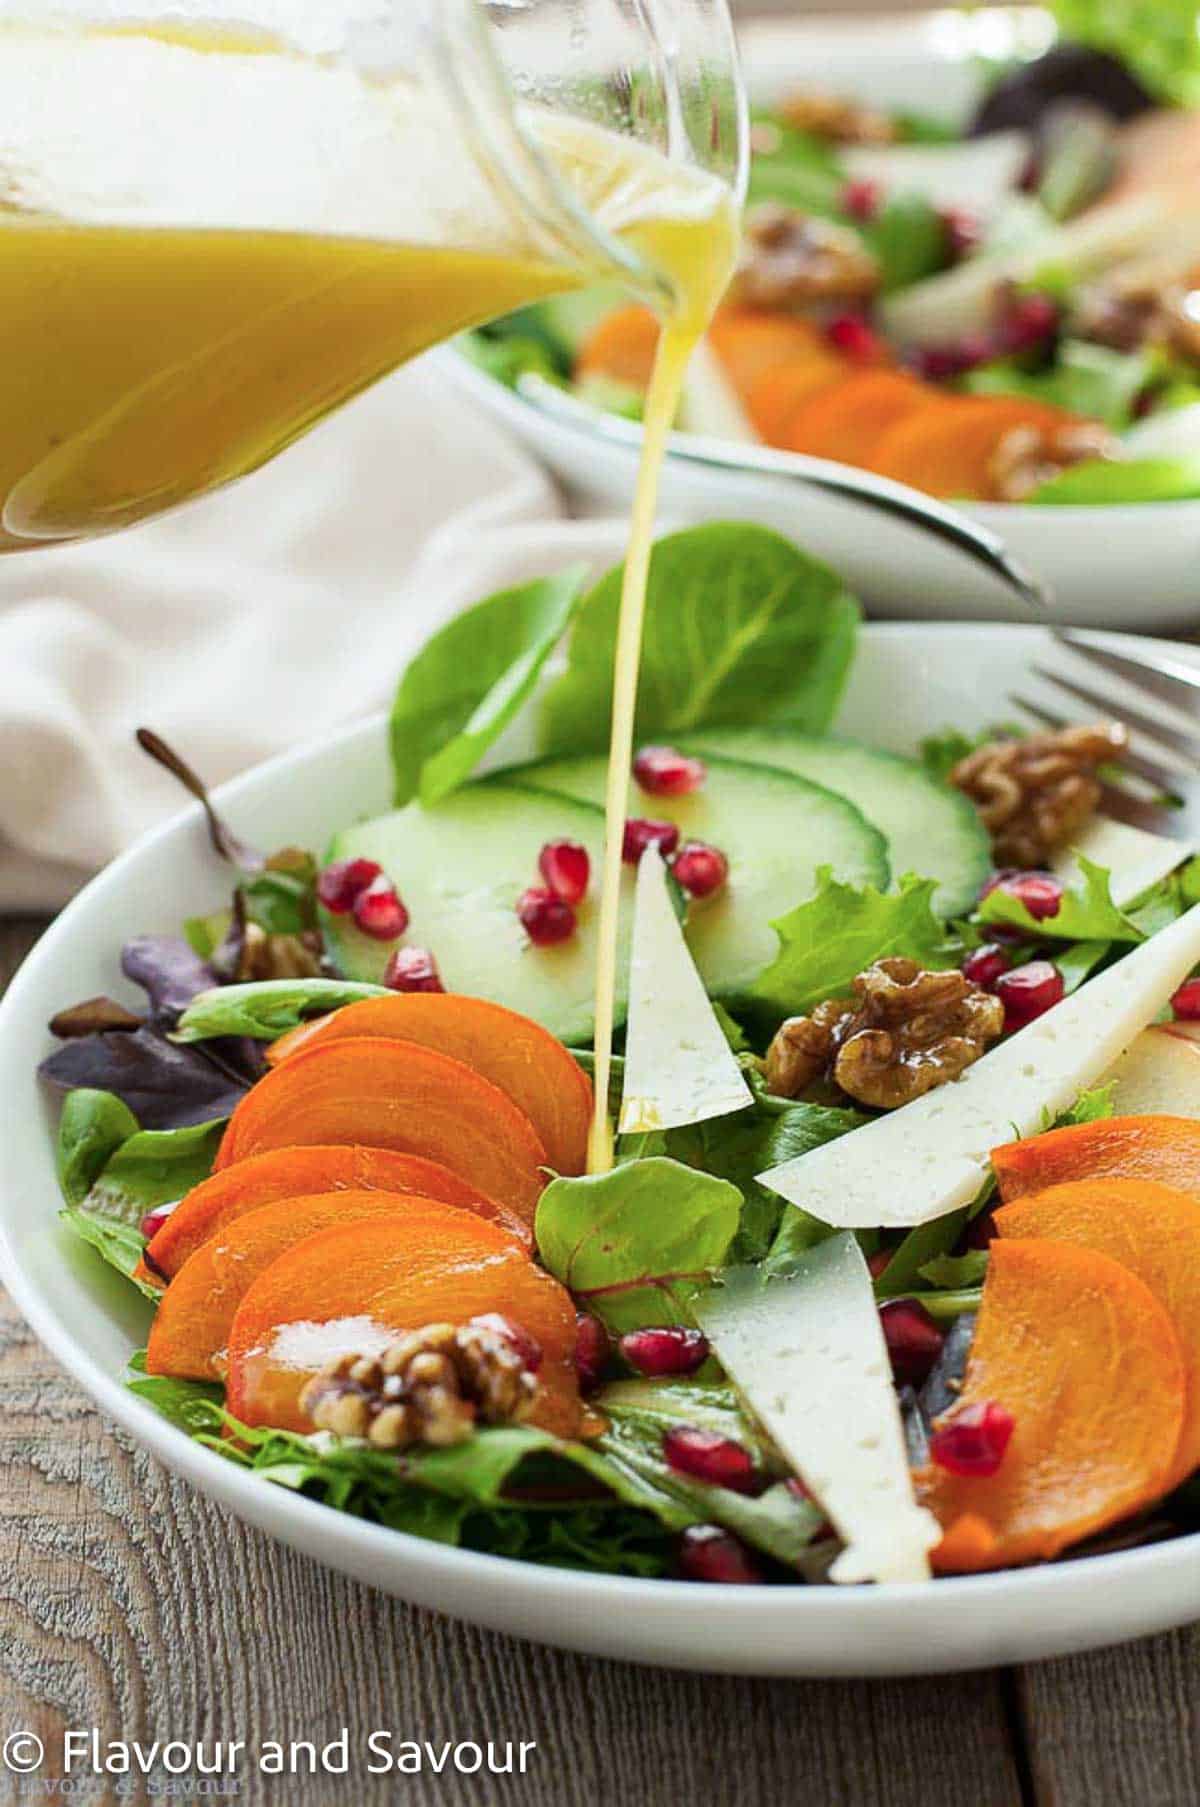 Pouring dressing on persimmon salad.